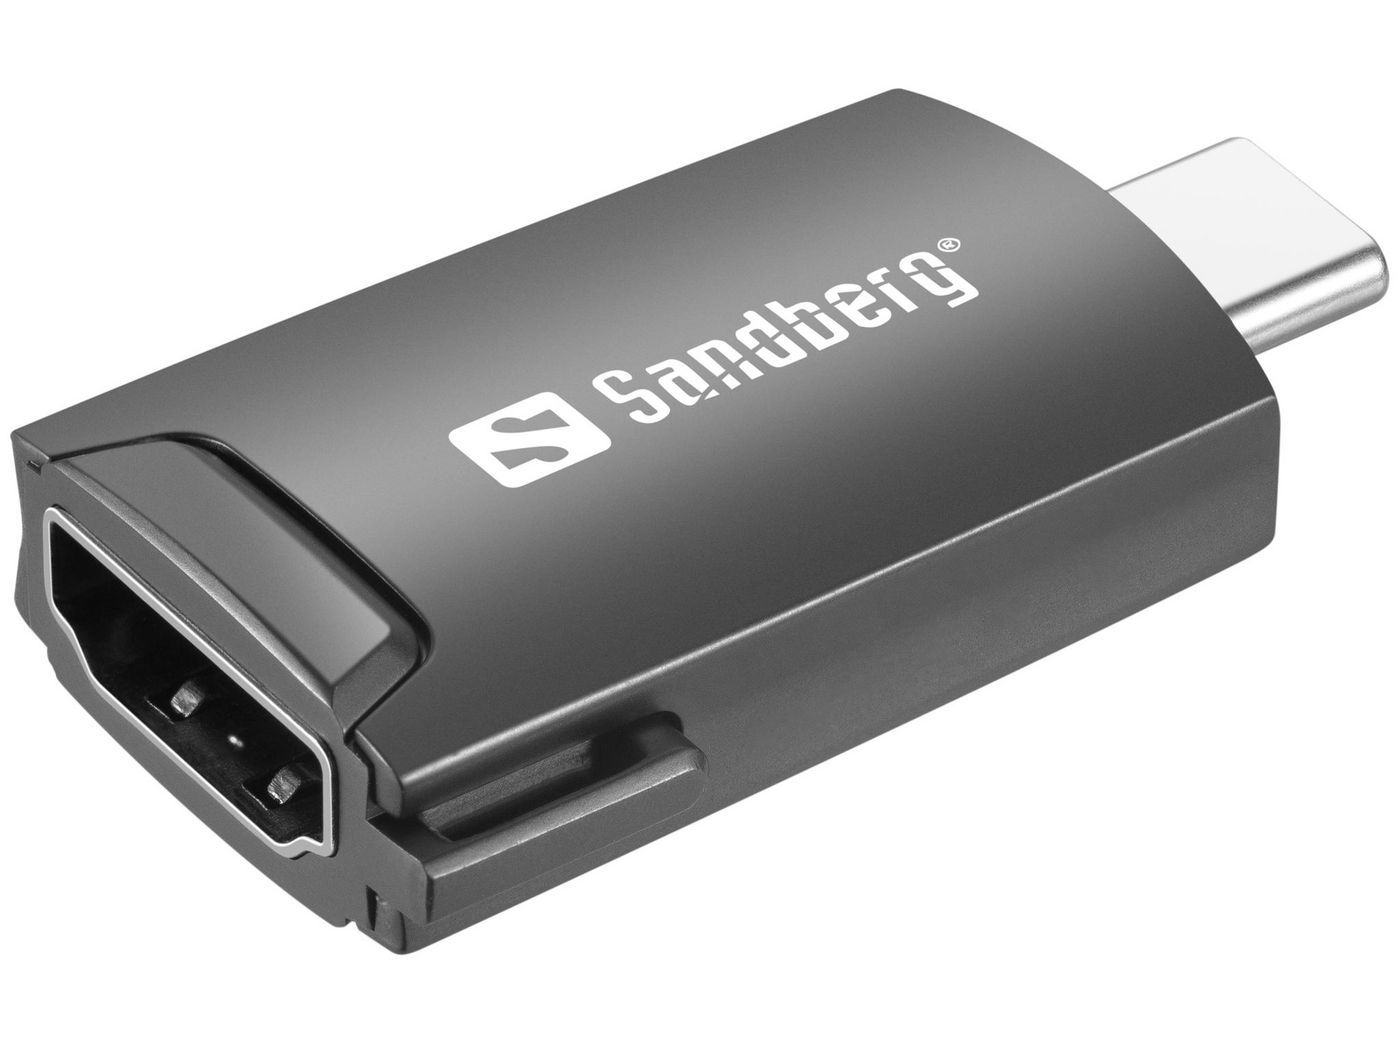 USB-C to HDMI Dongle